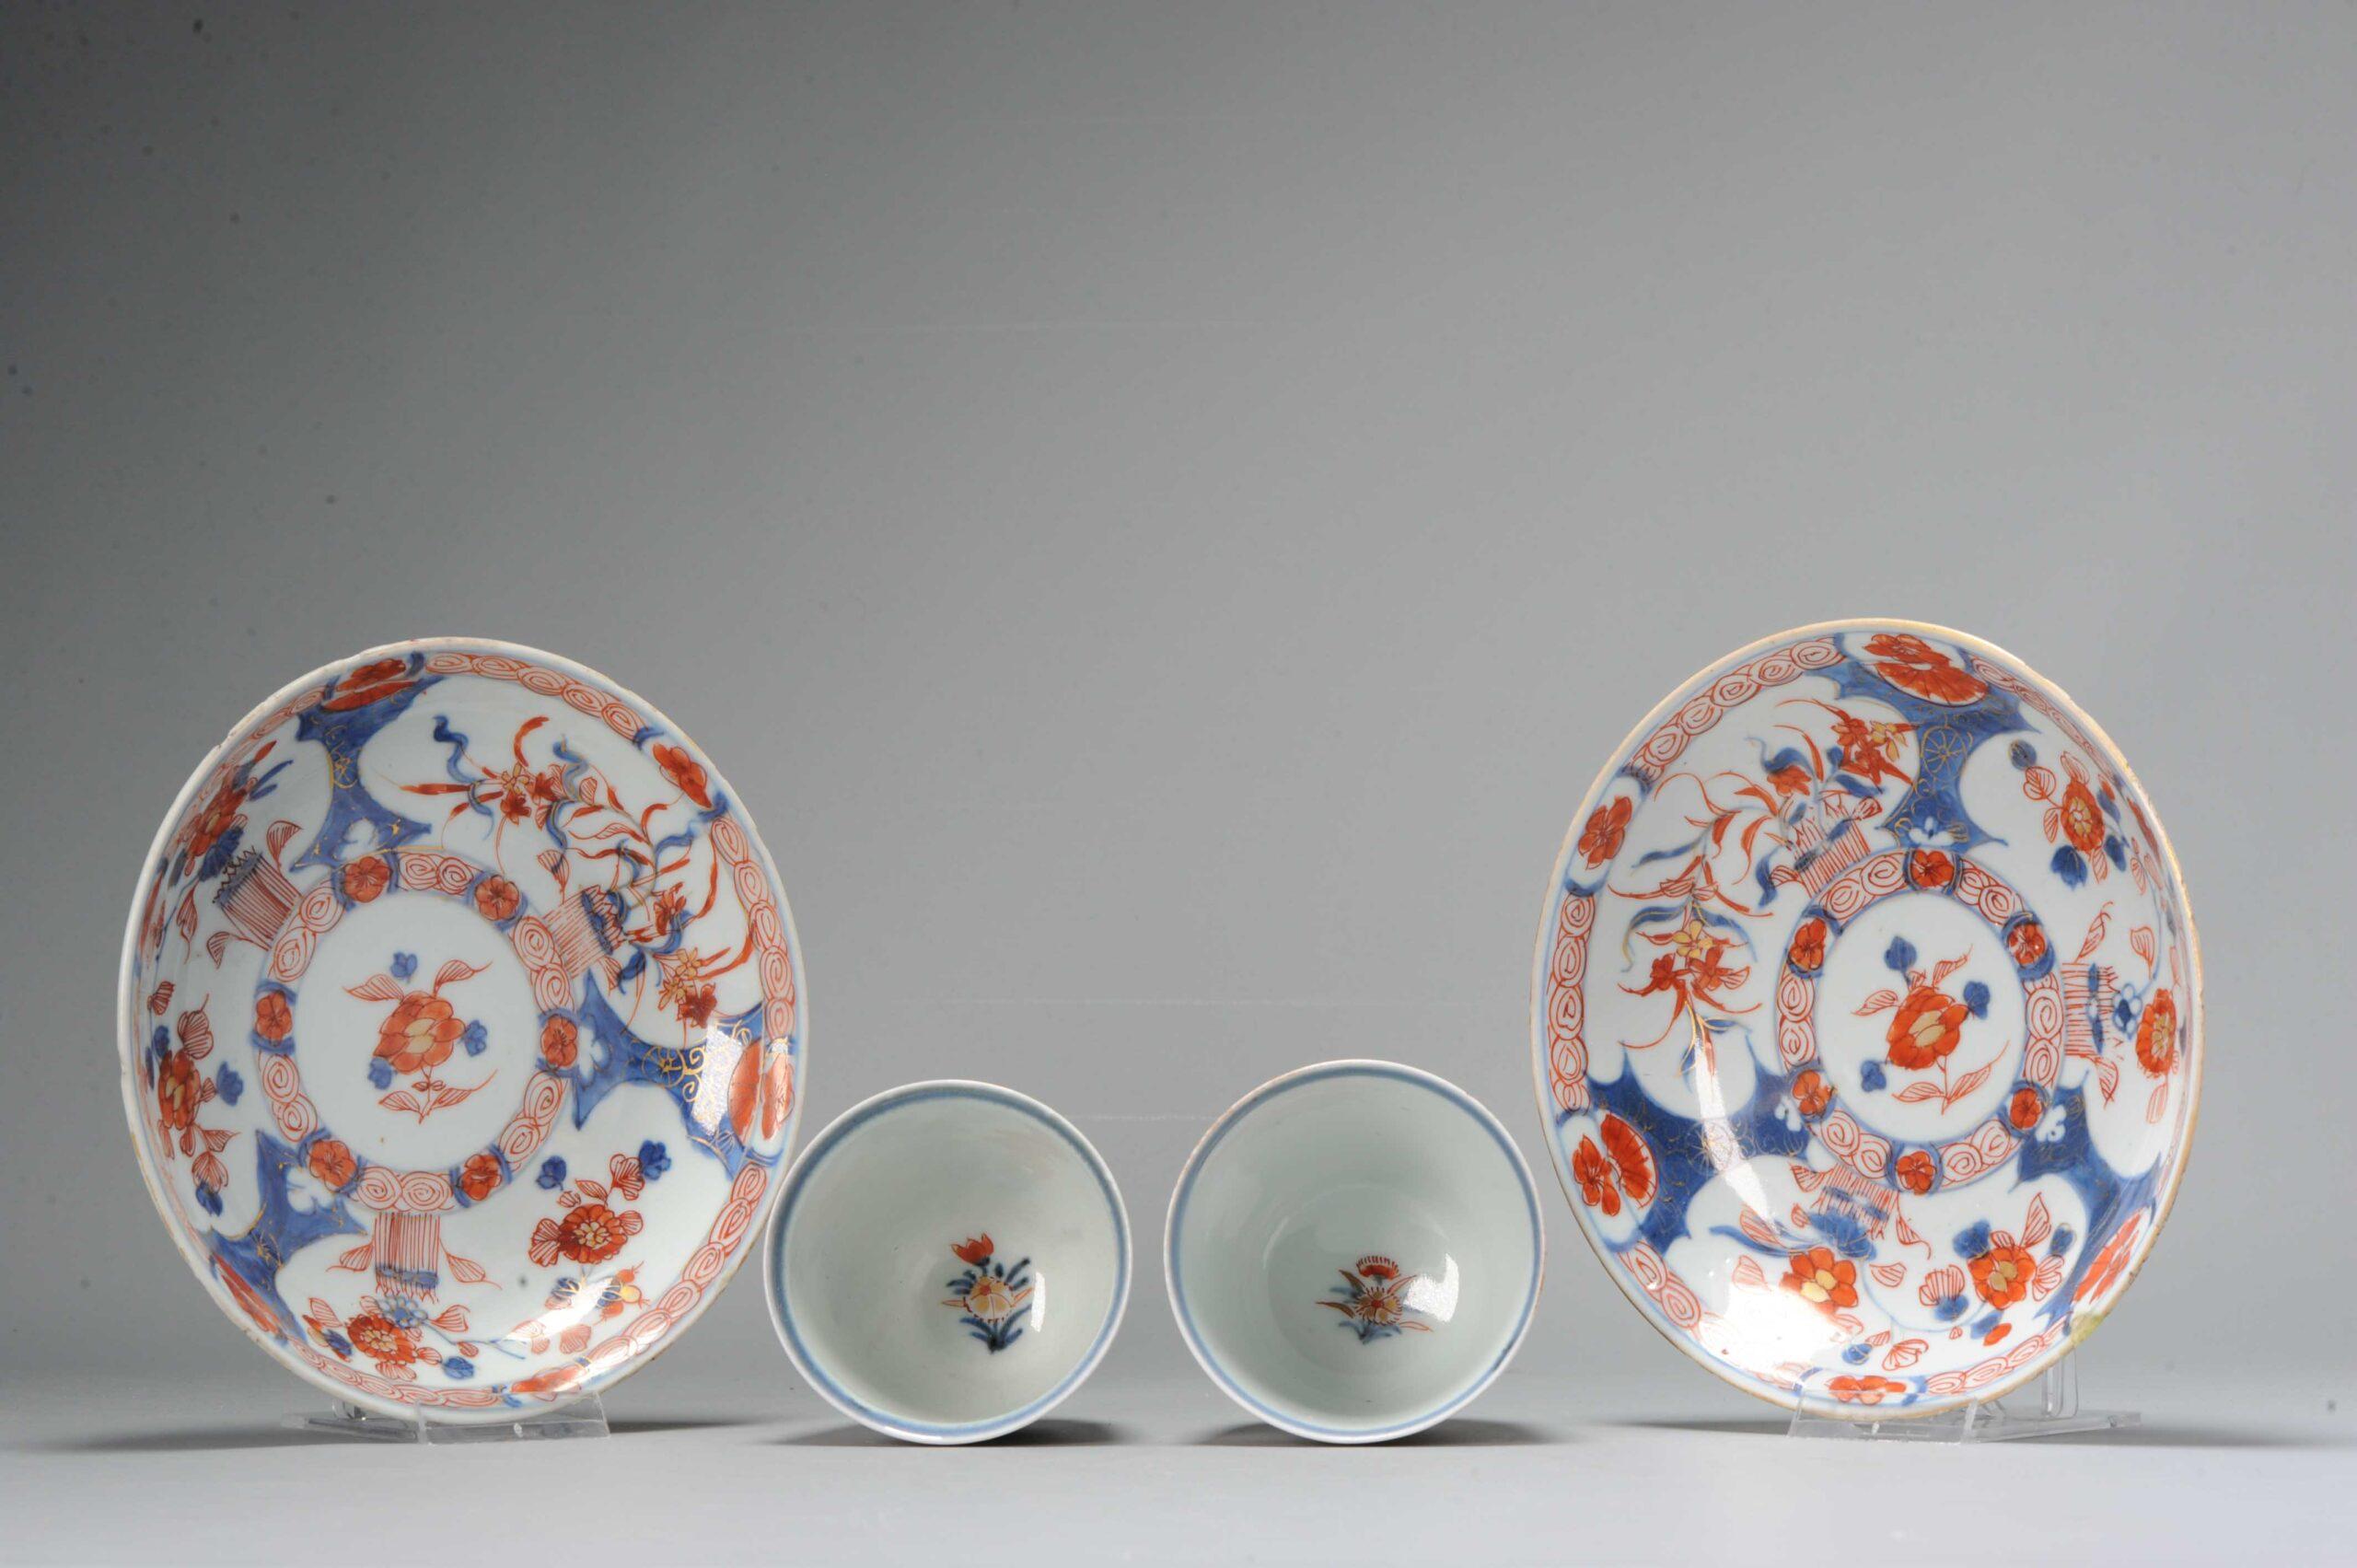 Very nice edo period examples, 18th century
A Japanese pair of Imari tea bowls / chocolate cups.

Additional information:
Material: Porcelain & Pottery
Type: Tea/Coffee Drinking: Bowls, Cups & Teapots
Japanese Style: Imari
Region of Origin: